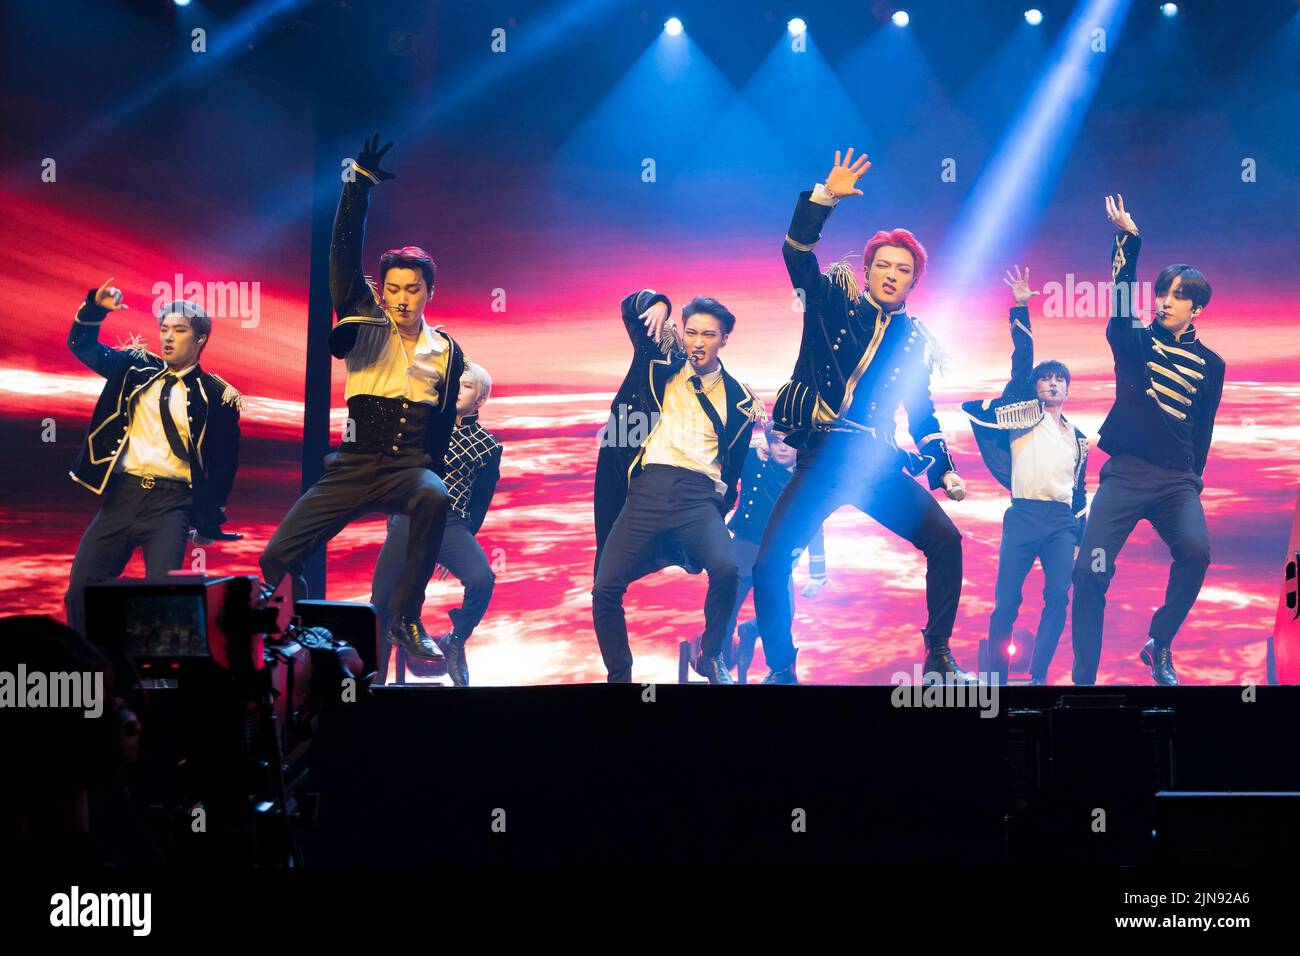 Performance by ATEEZ, a Kpop boy group, performing at  LA Forum during the THE FELLOWSHIP : BEGINNING OF THE END Tour dazzles fans at Forum. Stock Photo